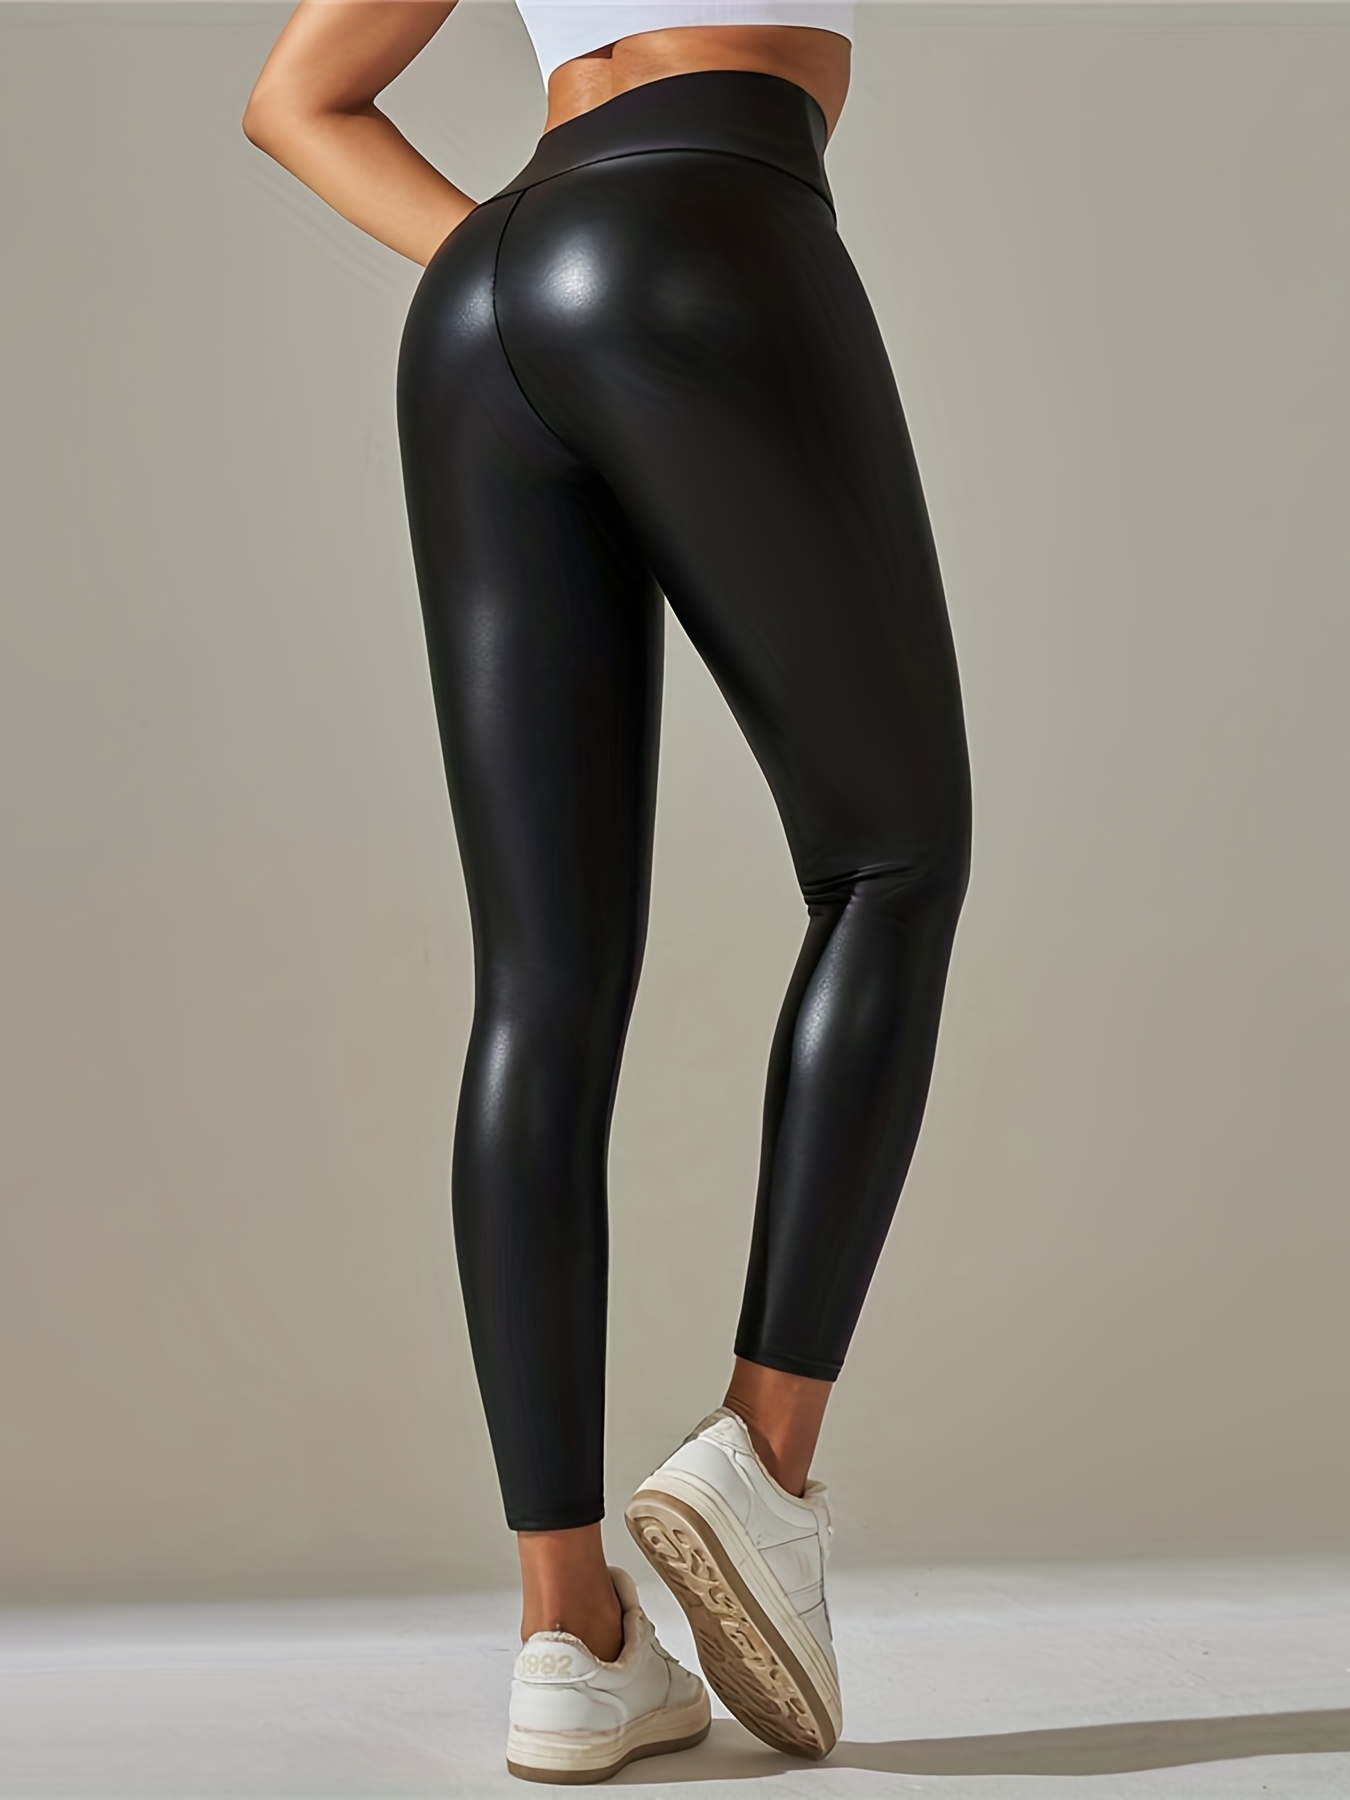 Exceptionally Stylish Woman in Tight XXX Leggings at Low Prices